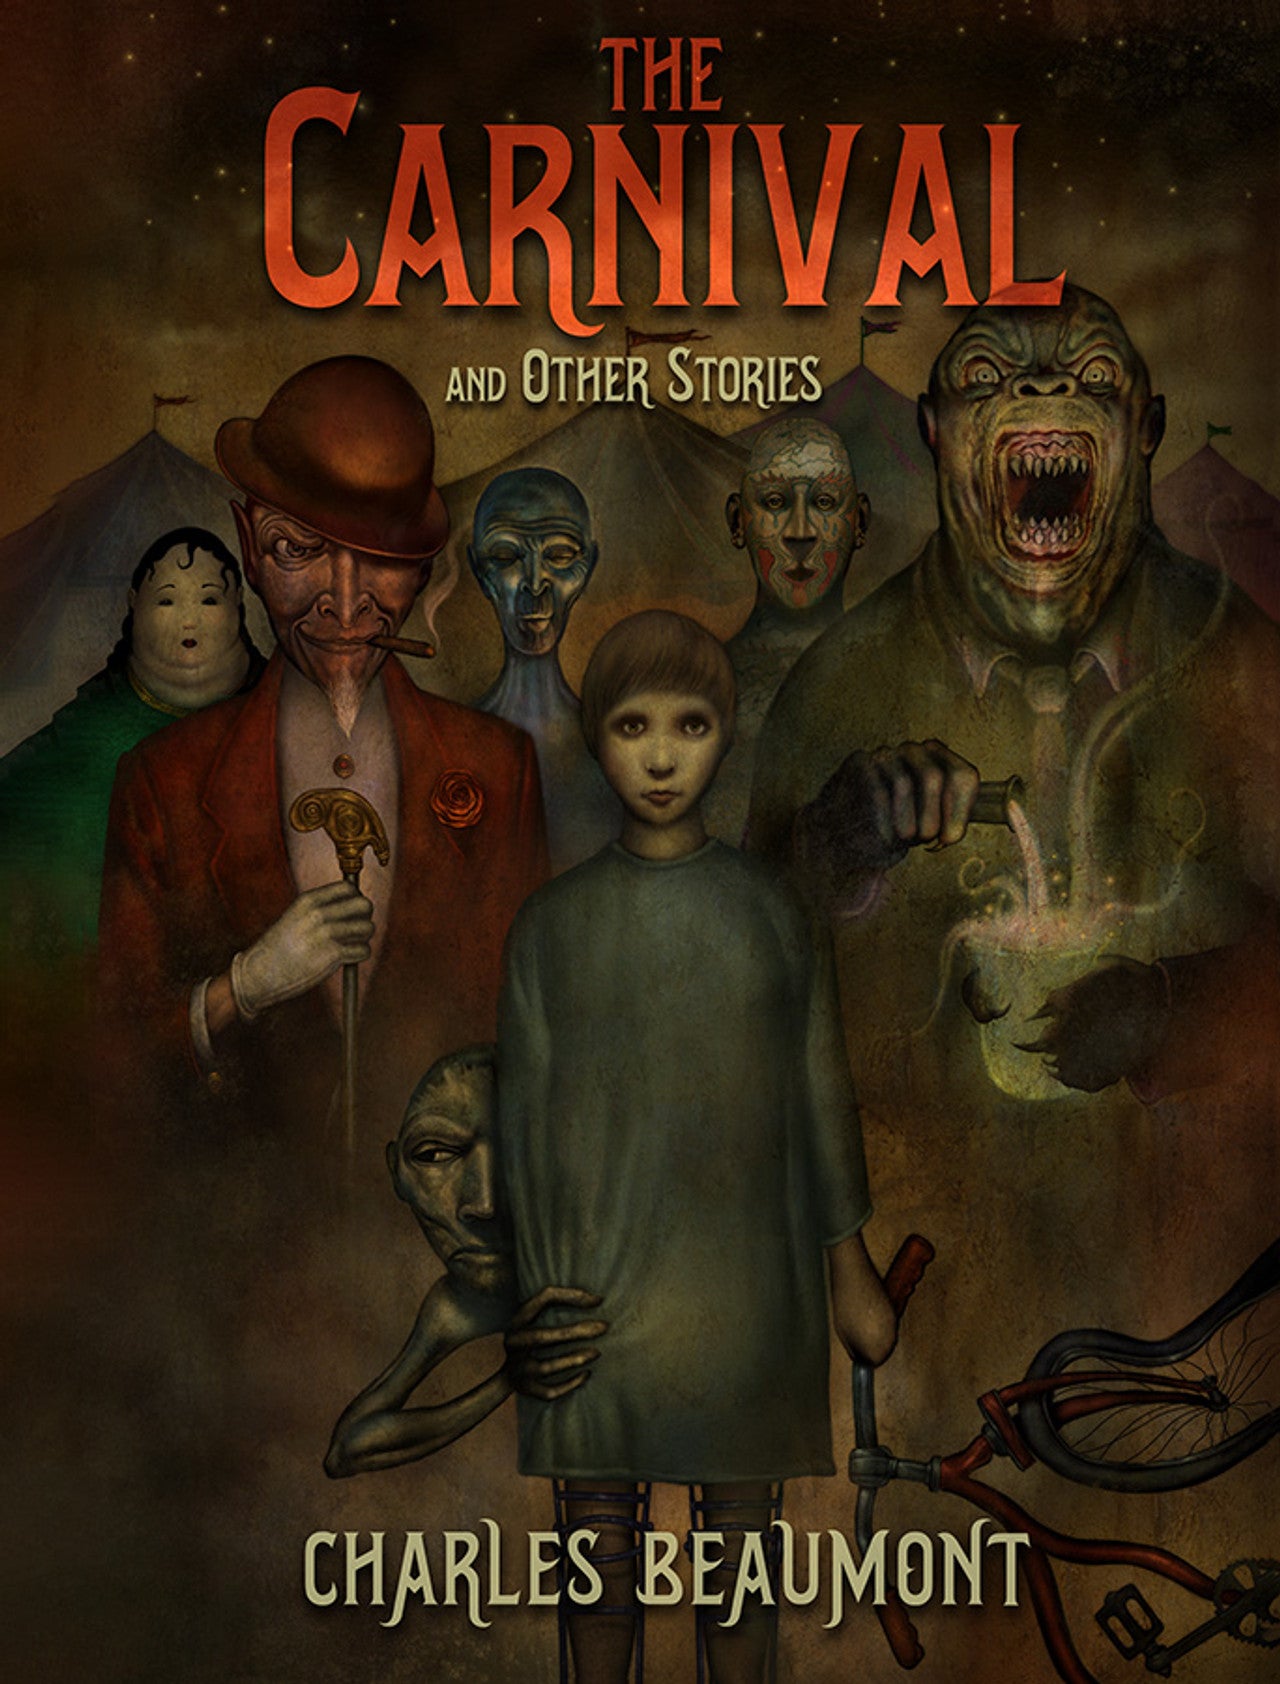 The Carnival & Other Stories by Charles Beaumont - hardcvr